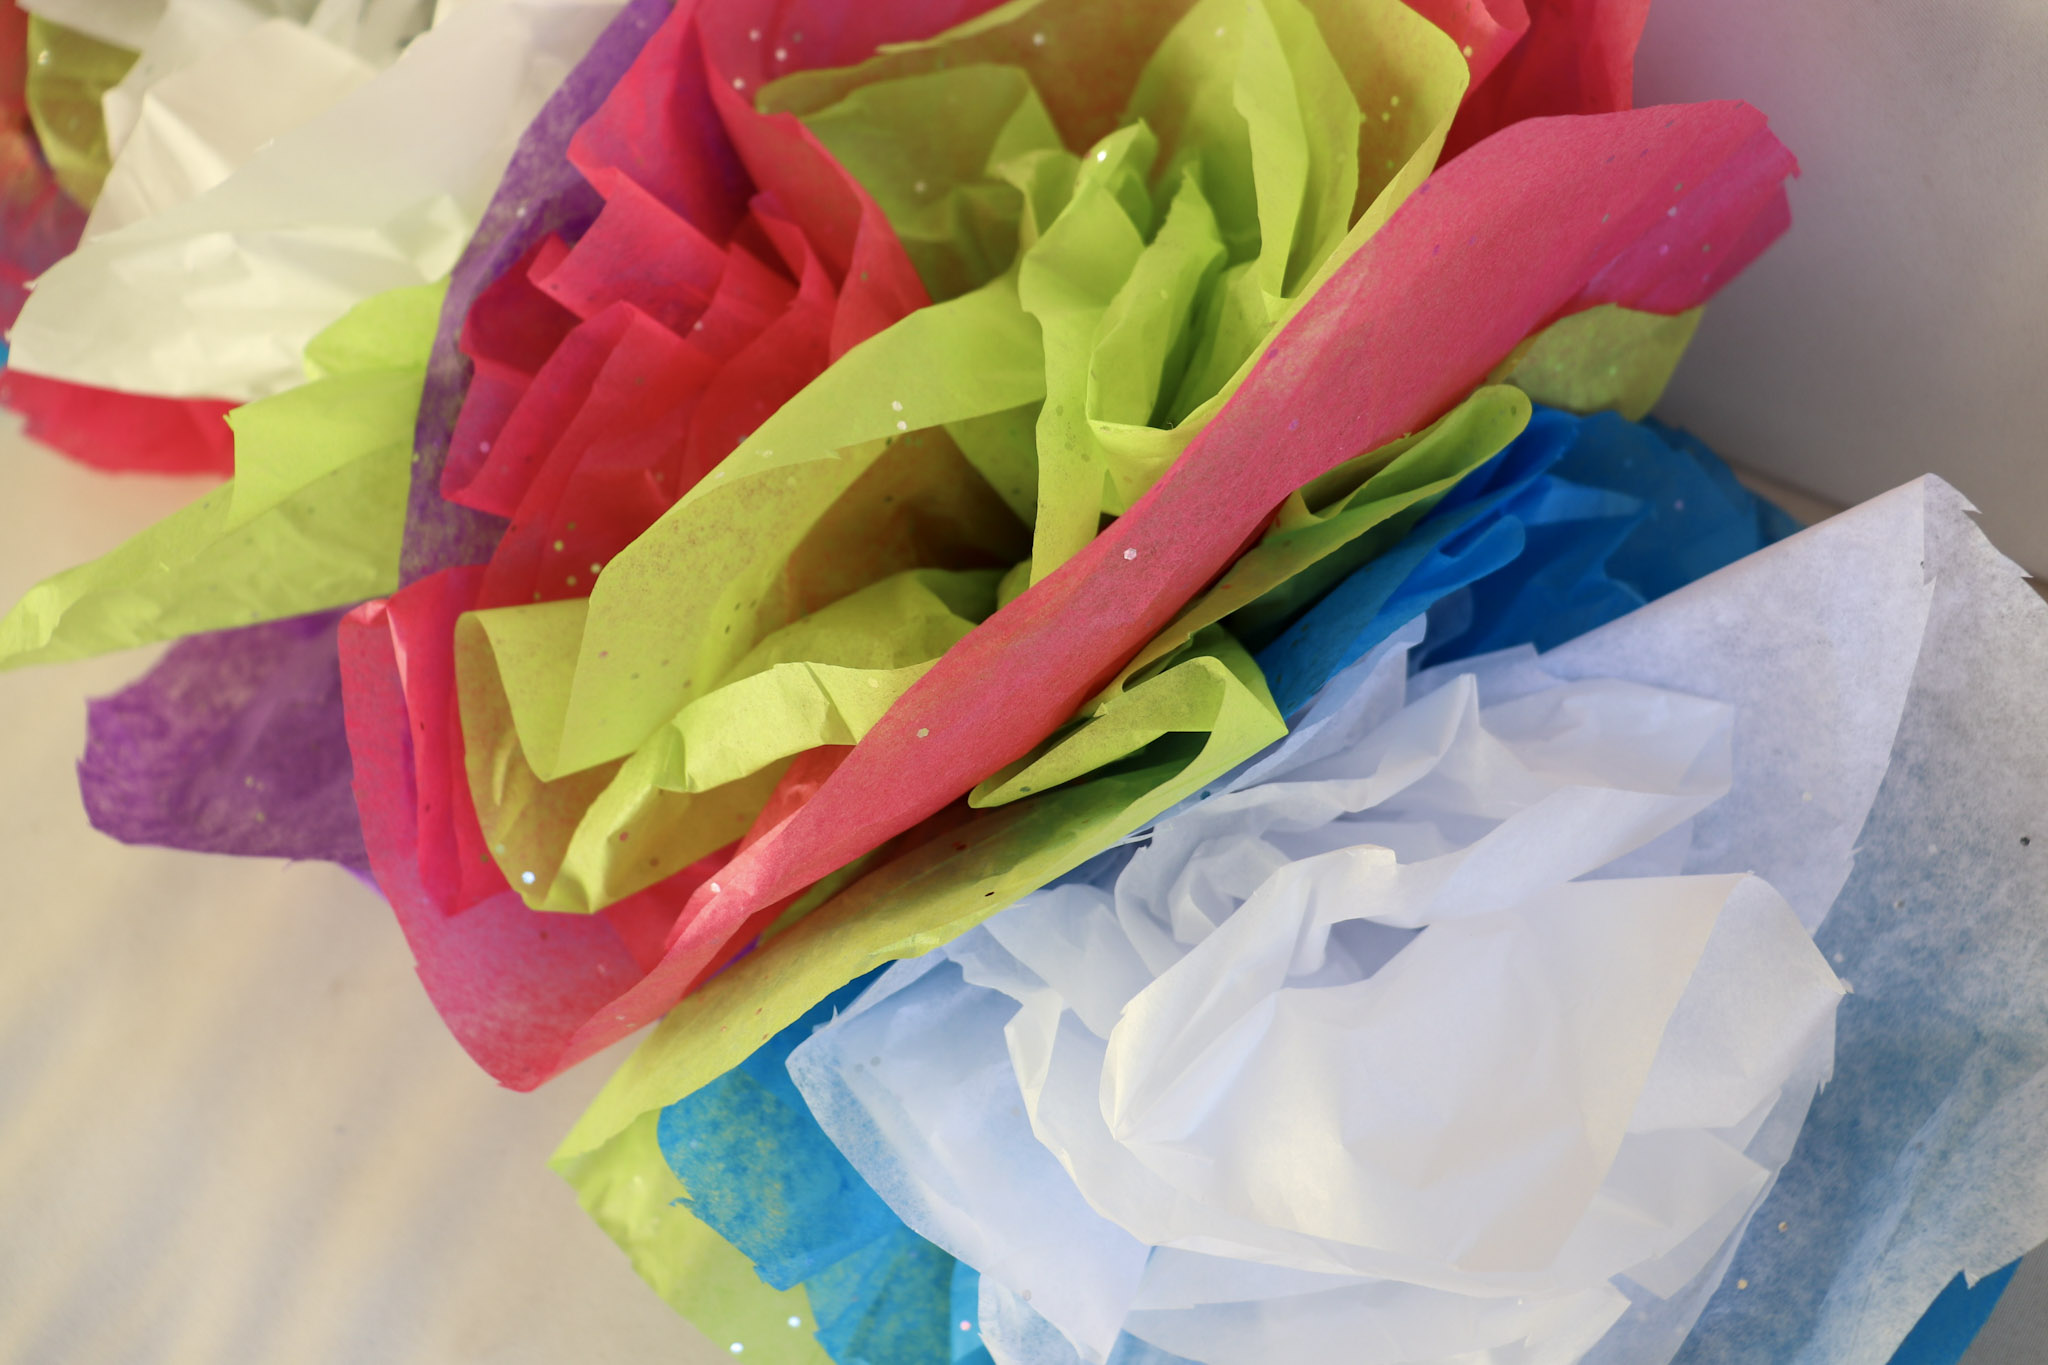 How to Make Flowers Out of Tissue Paper, Tissue Paper Craft, Tissue Paper Crafts, Giant Flowers out of Tissue Paper, Charlotte Artist